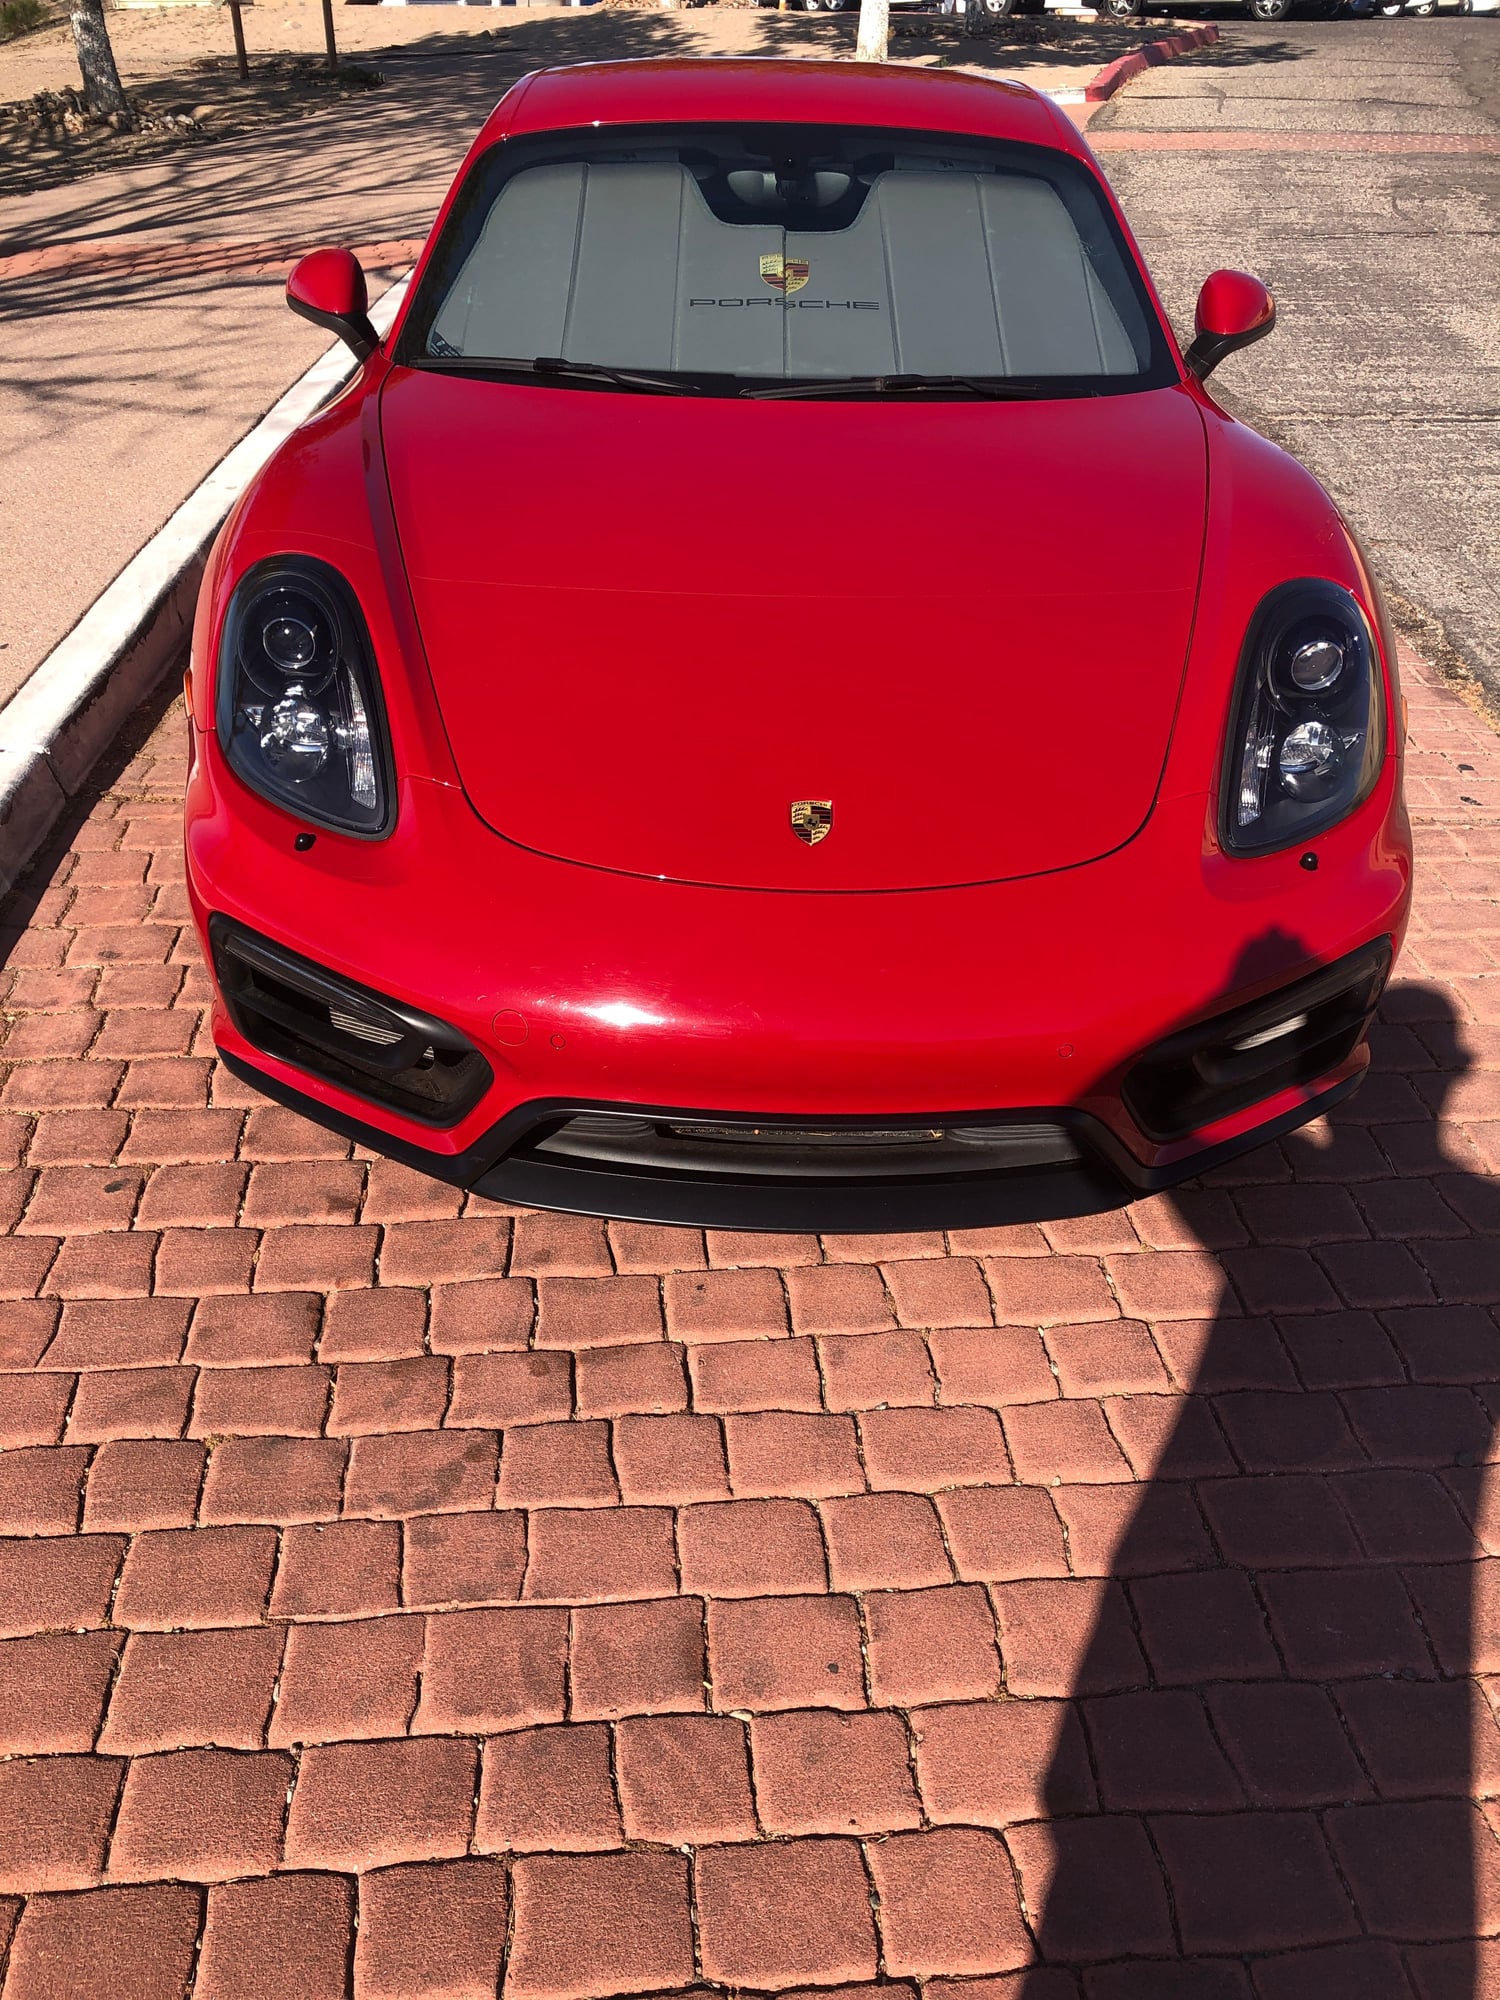 2016 Porsche Cayman - 2016 PORSCHE CAYMAN GTS - Used - VIN WP0AB2A84GK186445 - 17,700 Miles - 6 cyl - 2WD - Automatic - Coupe - Red - Nogales, AZ 85621, United States